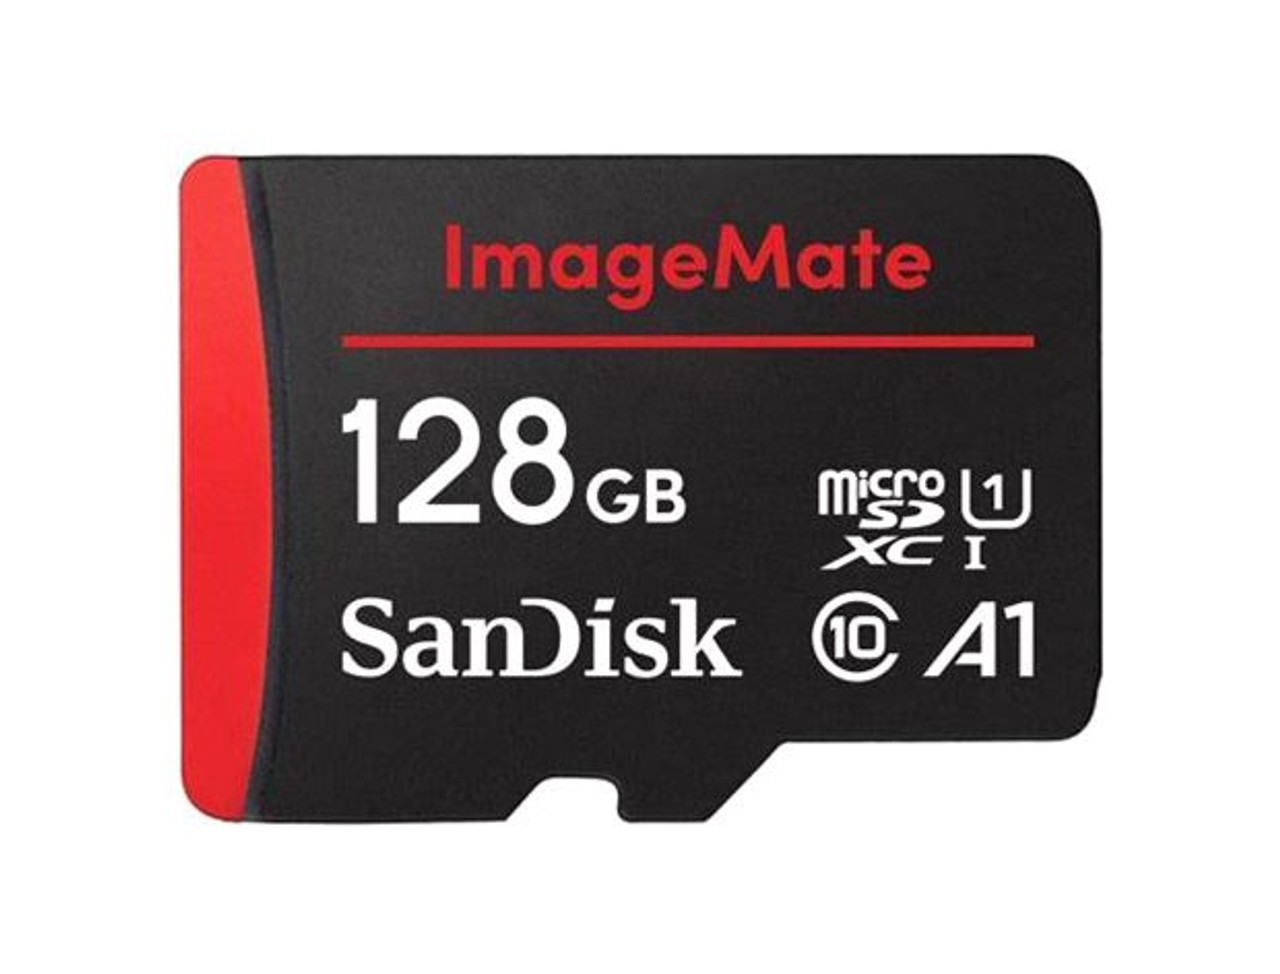 SDSSWMTMICRO2PACK | SanDisk | 128GB ImageMate Plus microSDXC UHS-1 Memory Card with Adapter